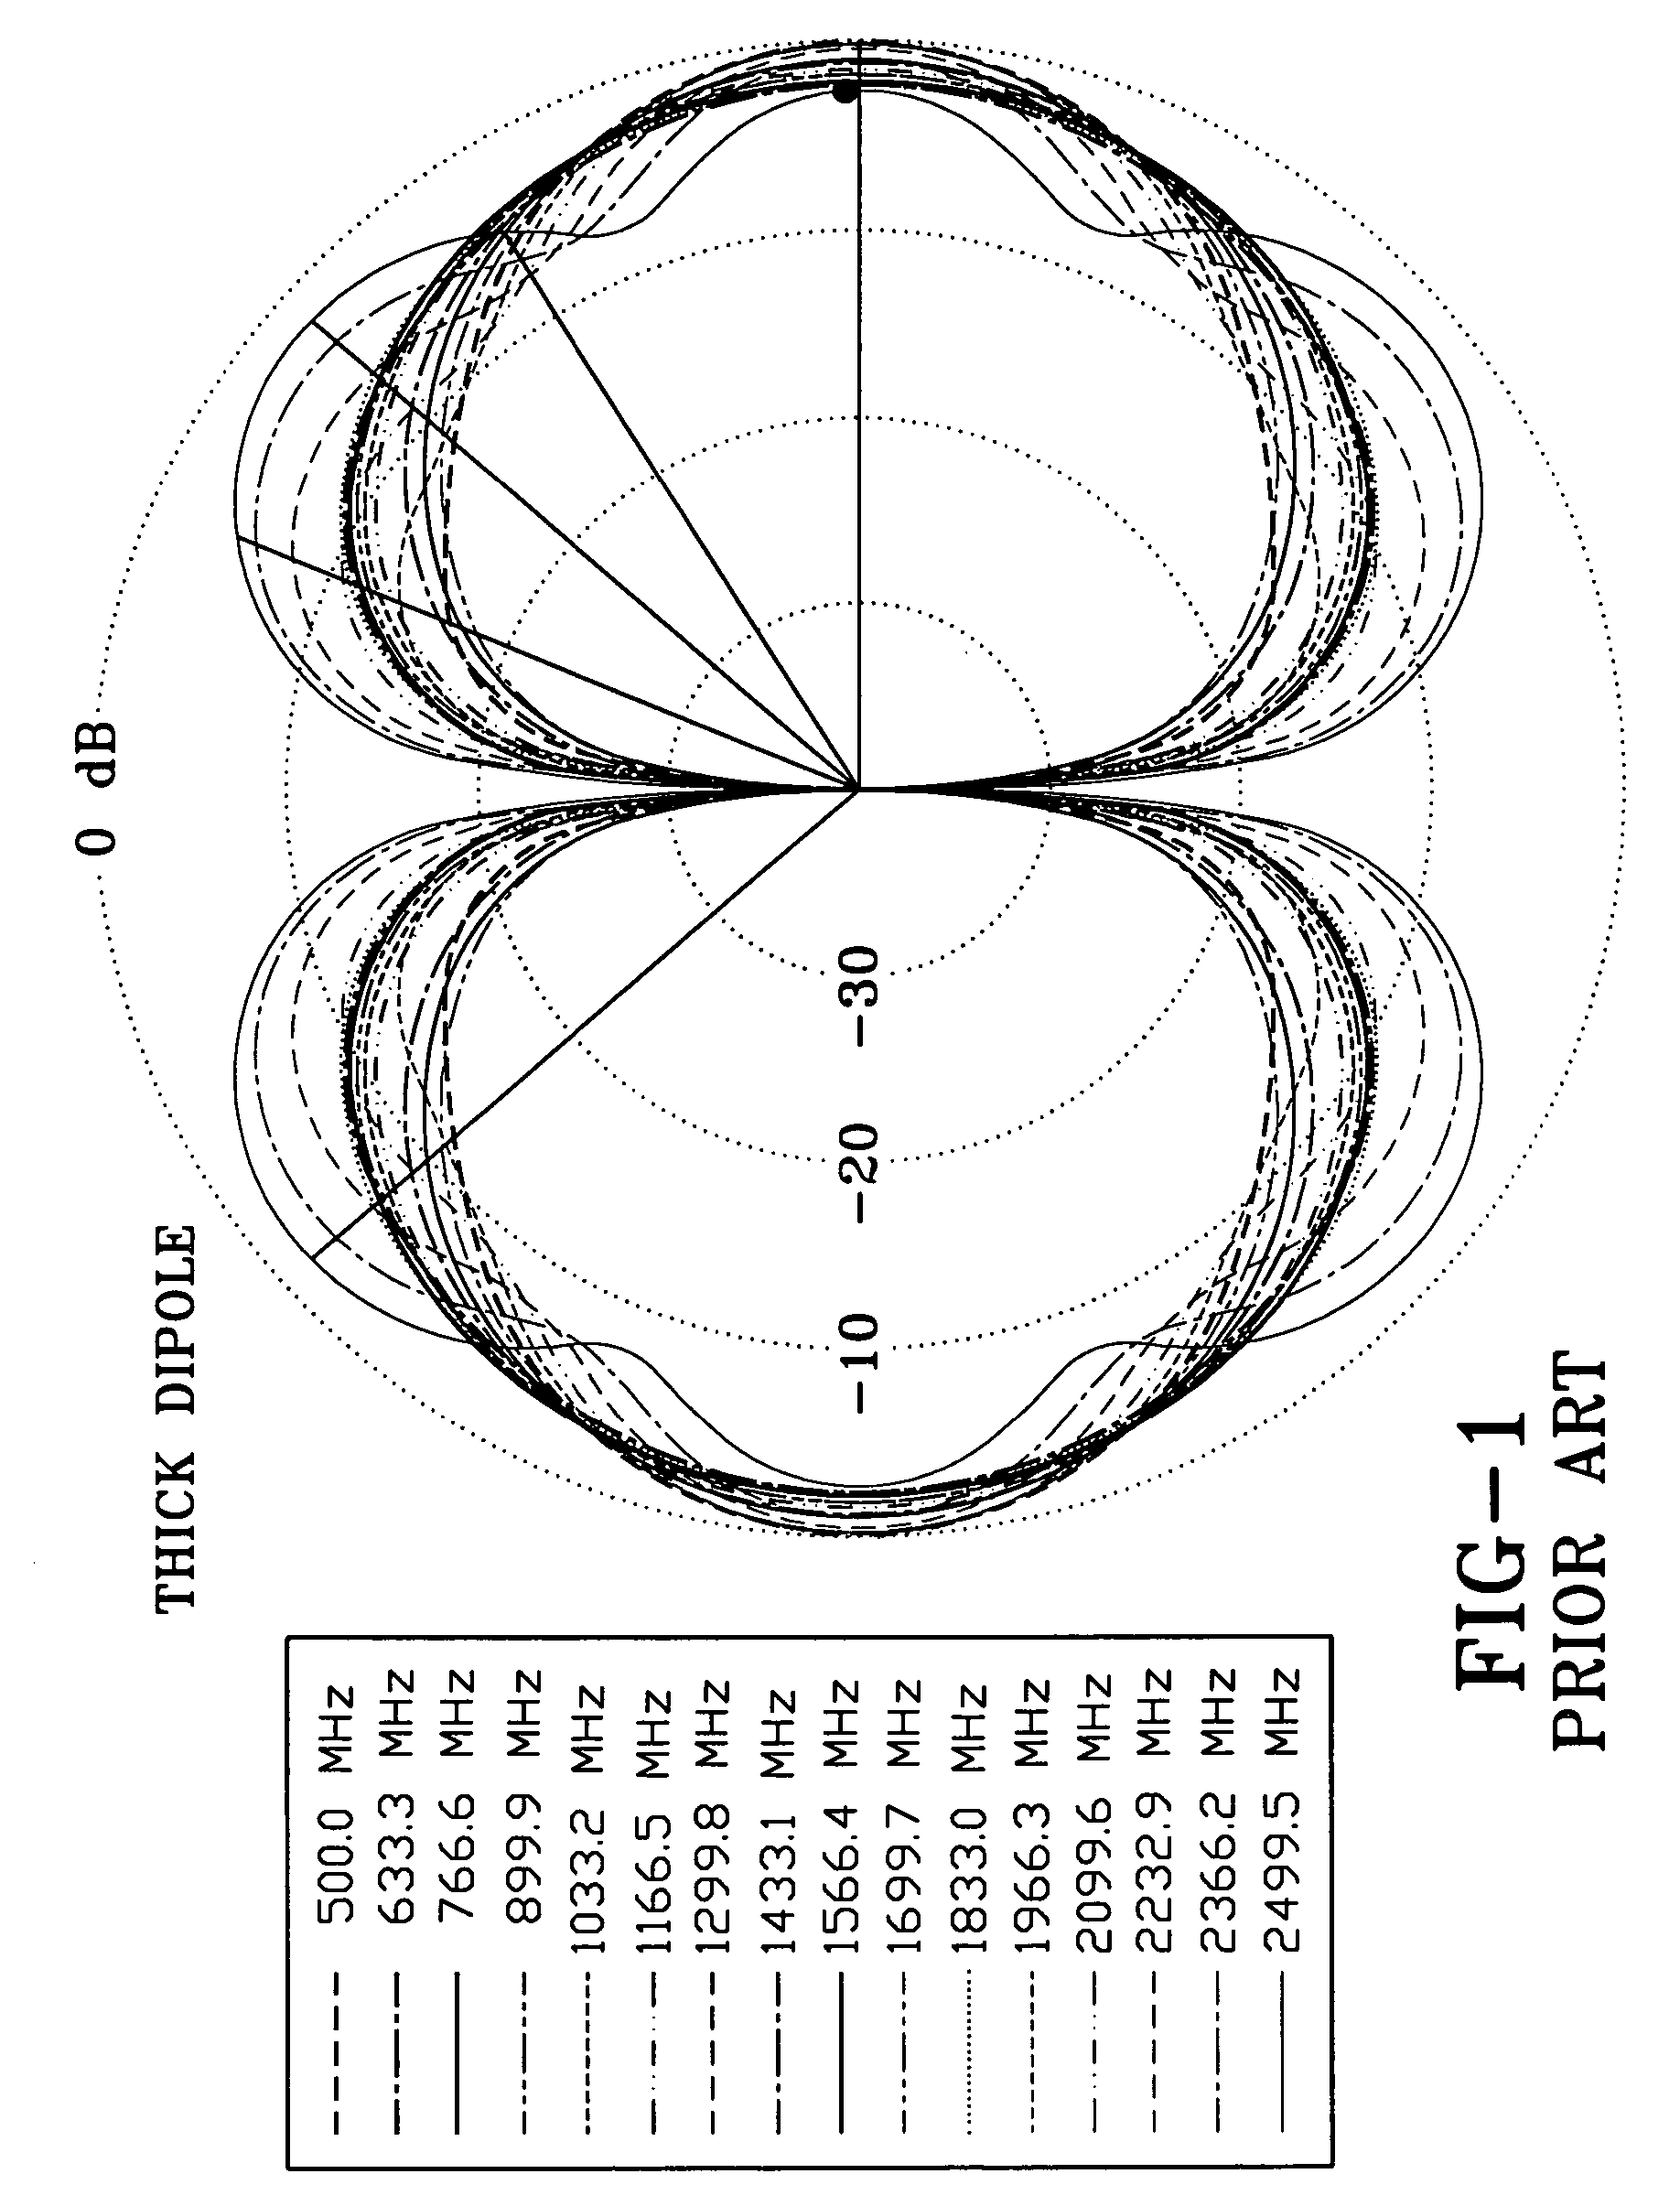 Wide band biconical antennas with an integrated matching system